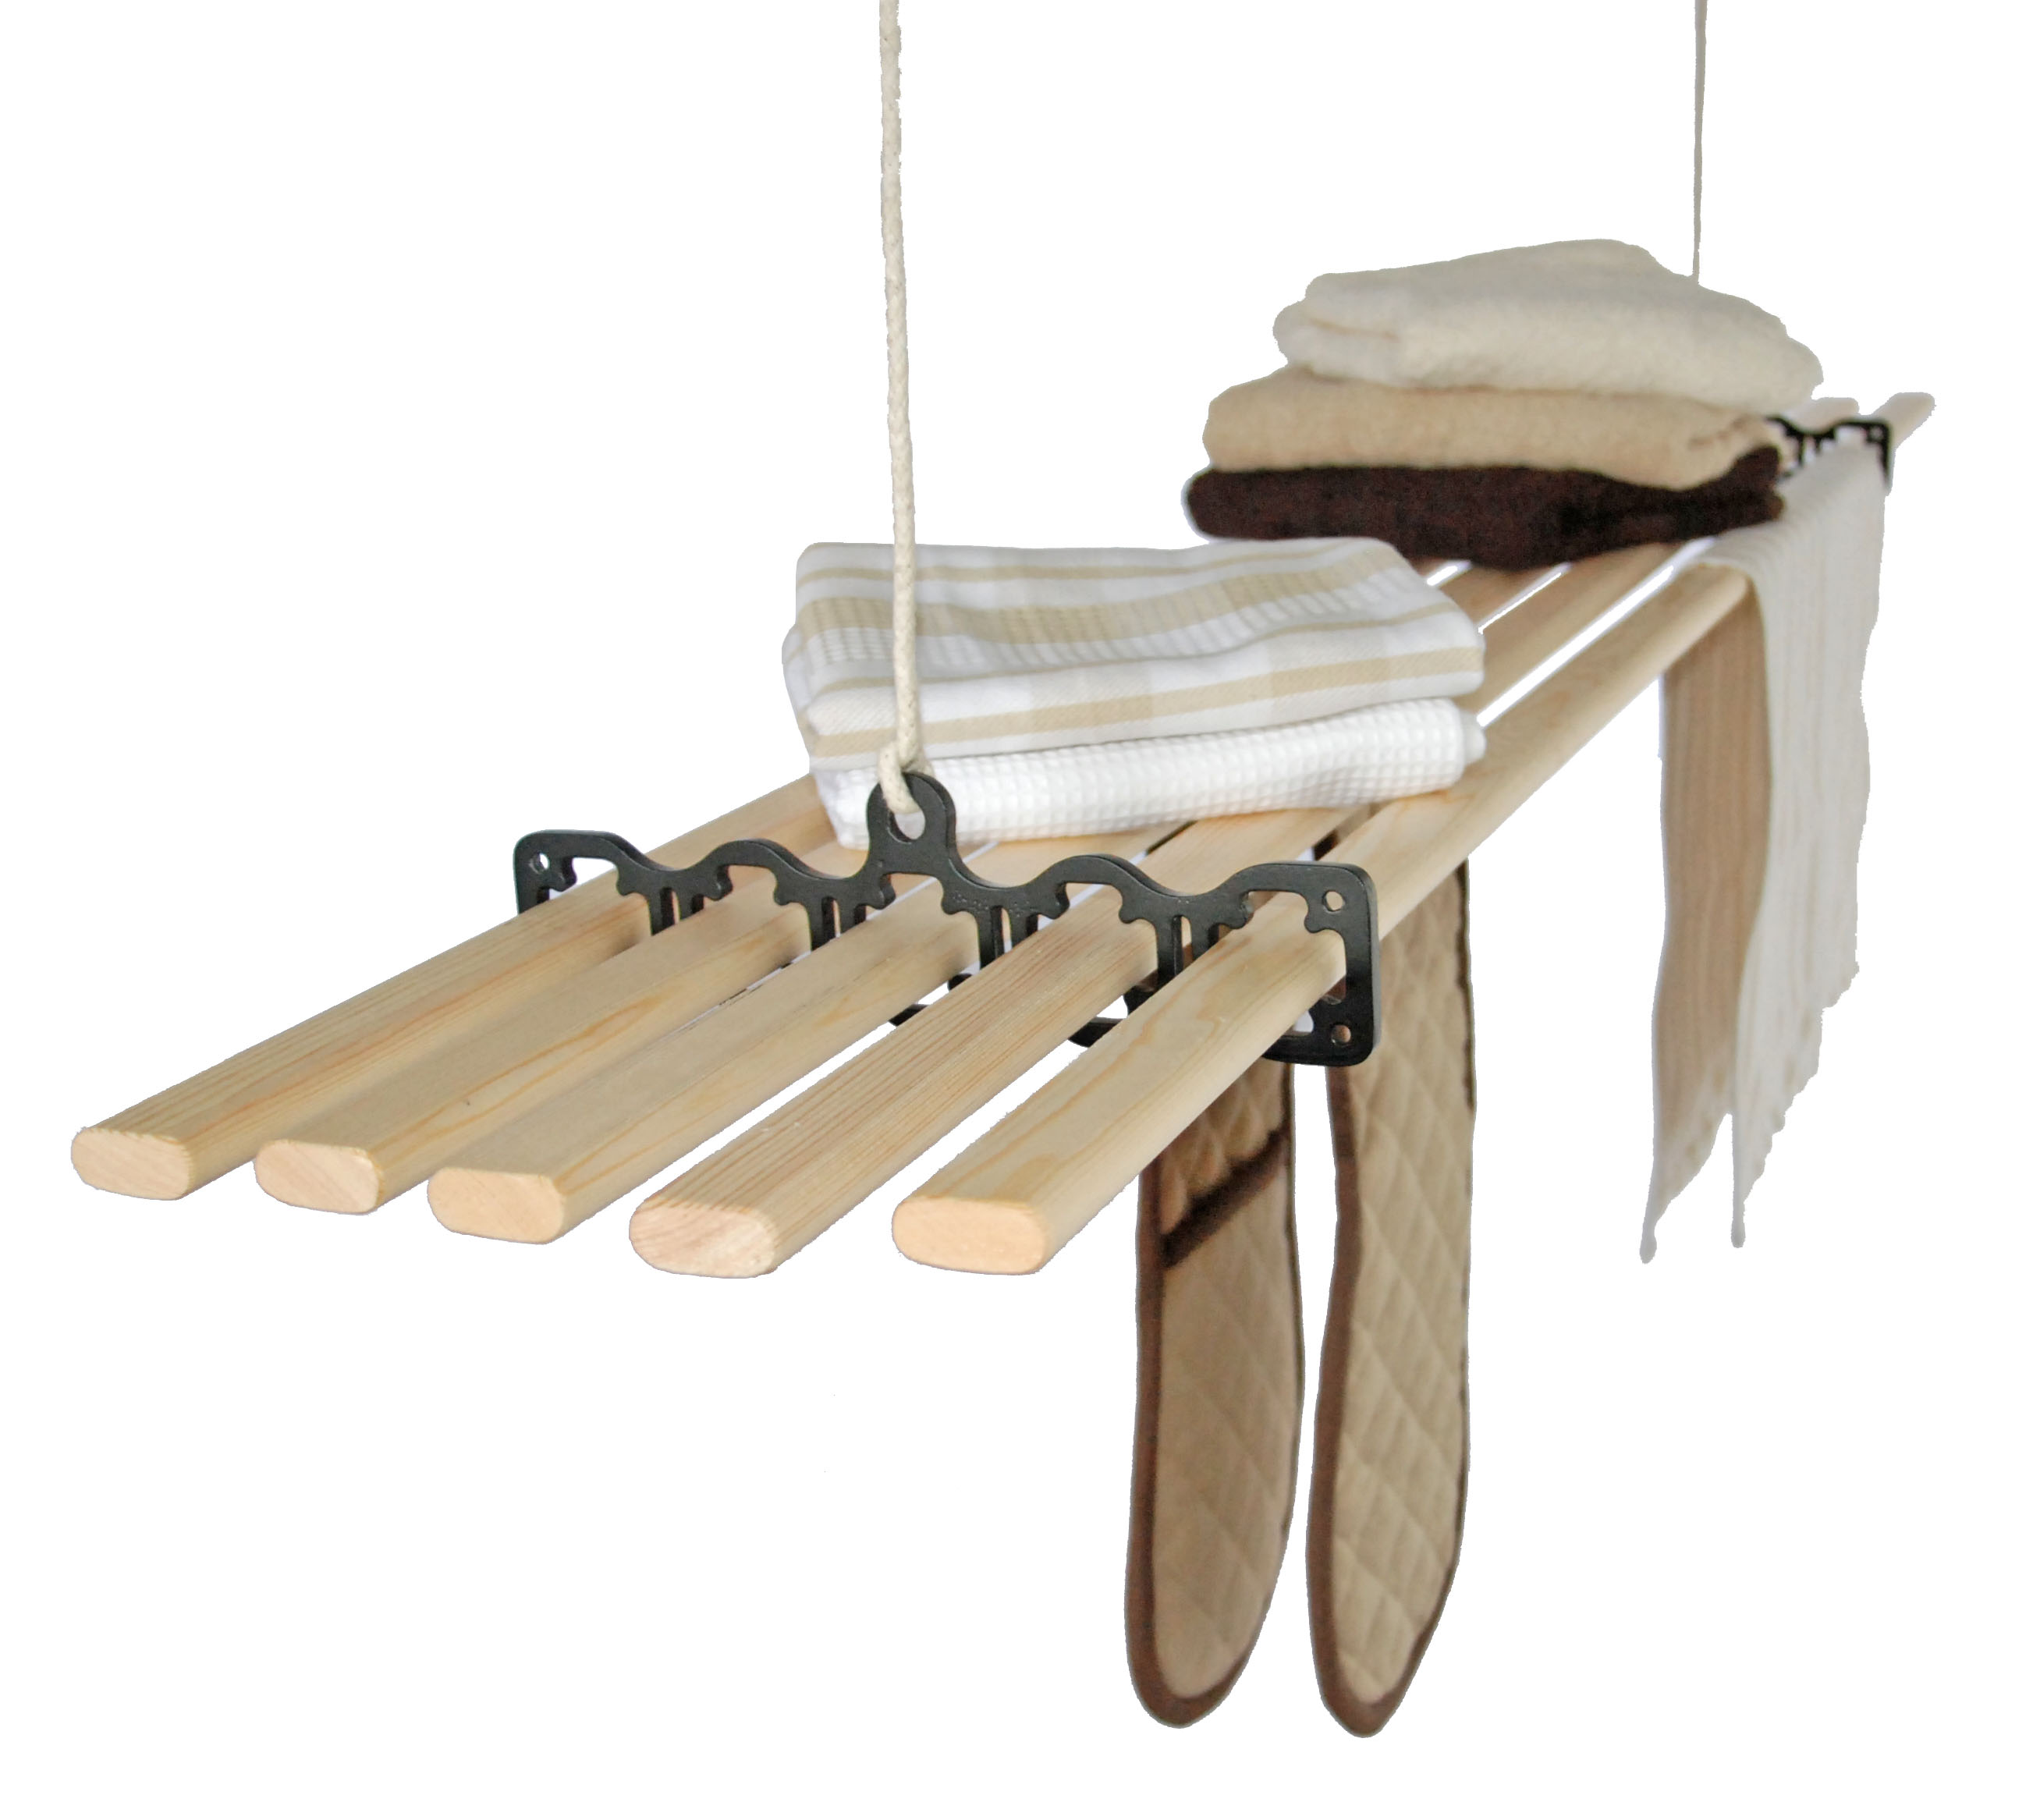 Category Ceiling Mounted Clothes Airers Urban Clotheslines